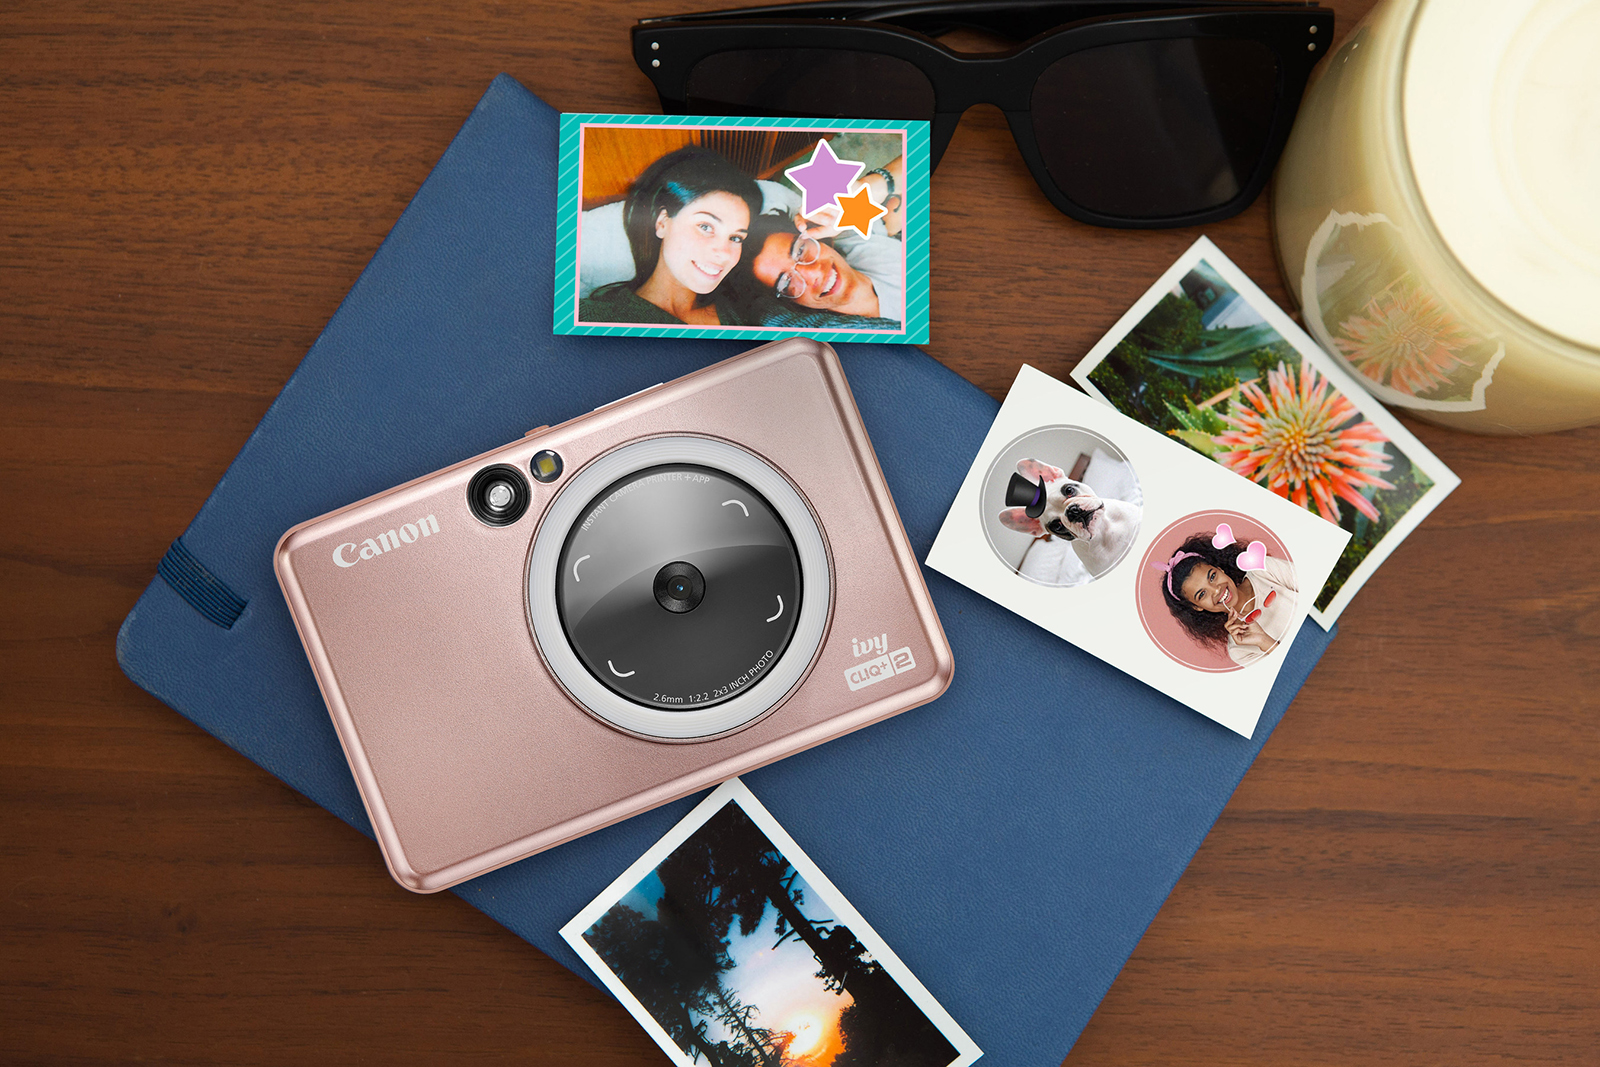 How To Load Zink Photo Paper In The Canon Ivy Mini Photo Printer? 